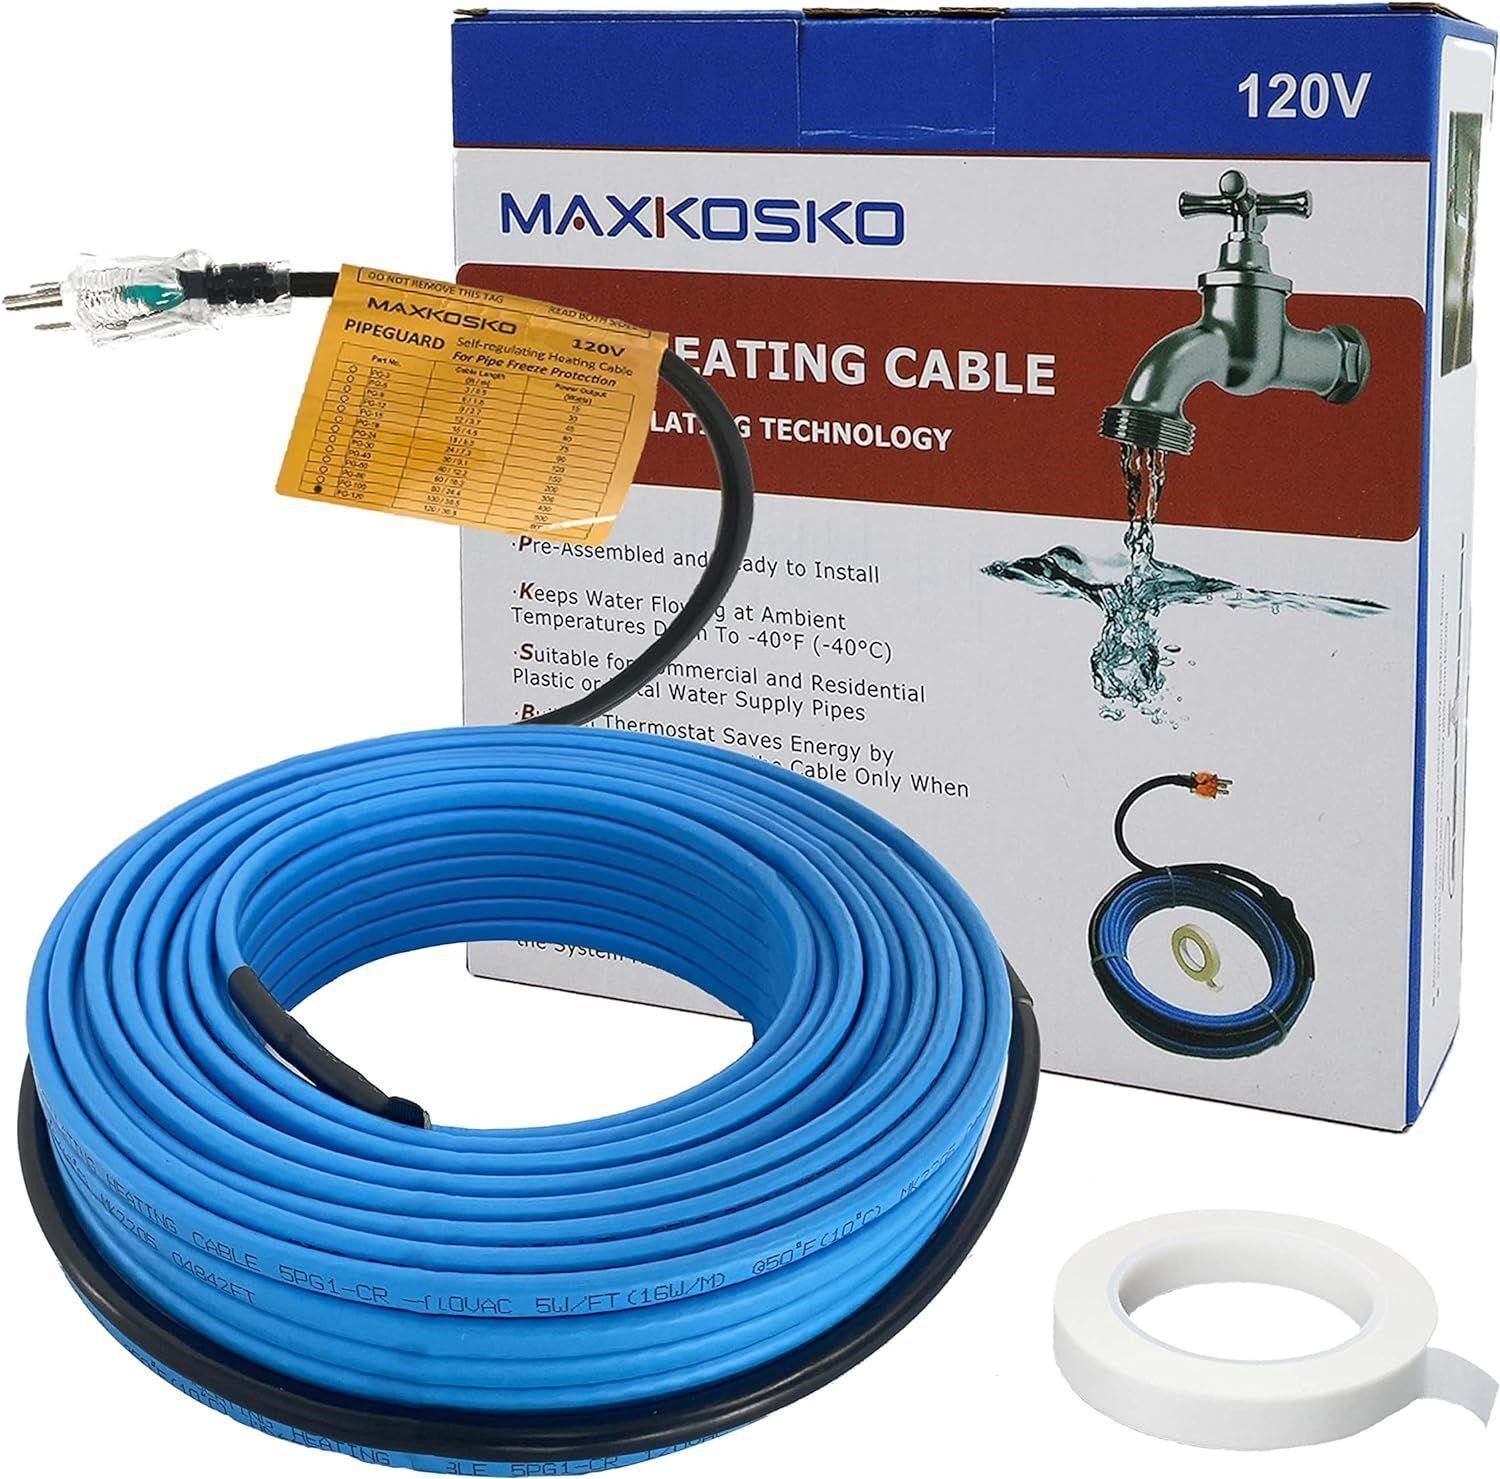 NEW $46 Self-Regulating Heating Cable For Pipes